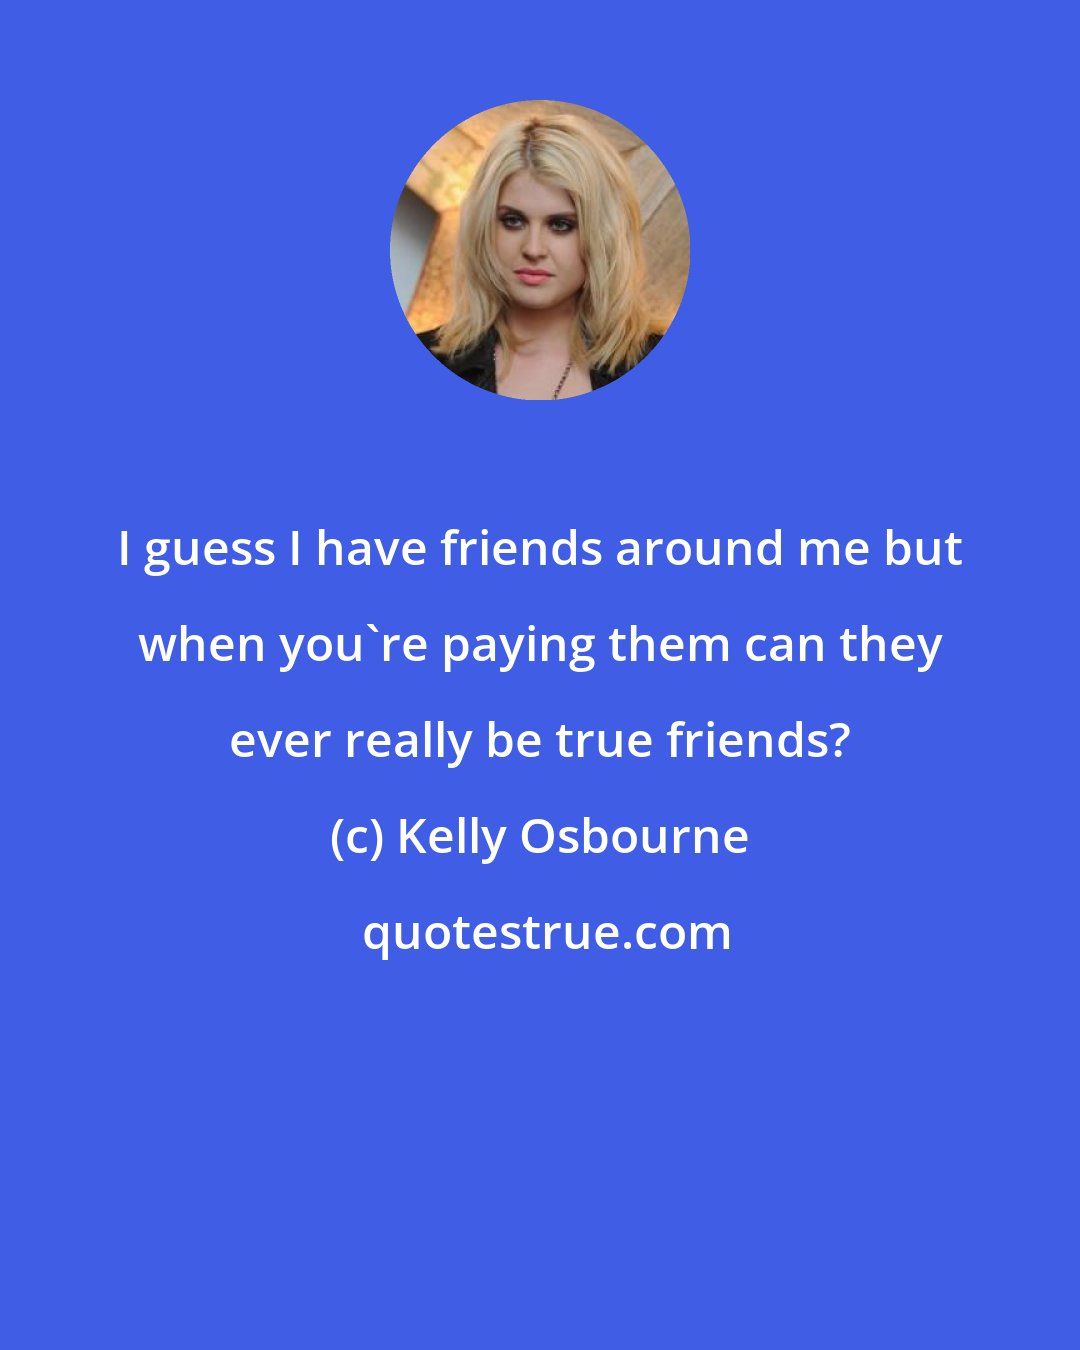 Kelly Osbourne: I guess I have friends around me but when you're paying them can they ever really be true friends?